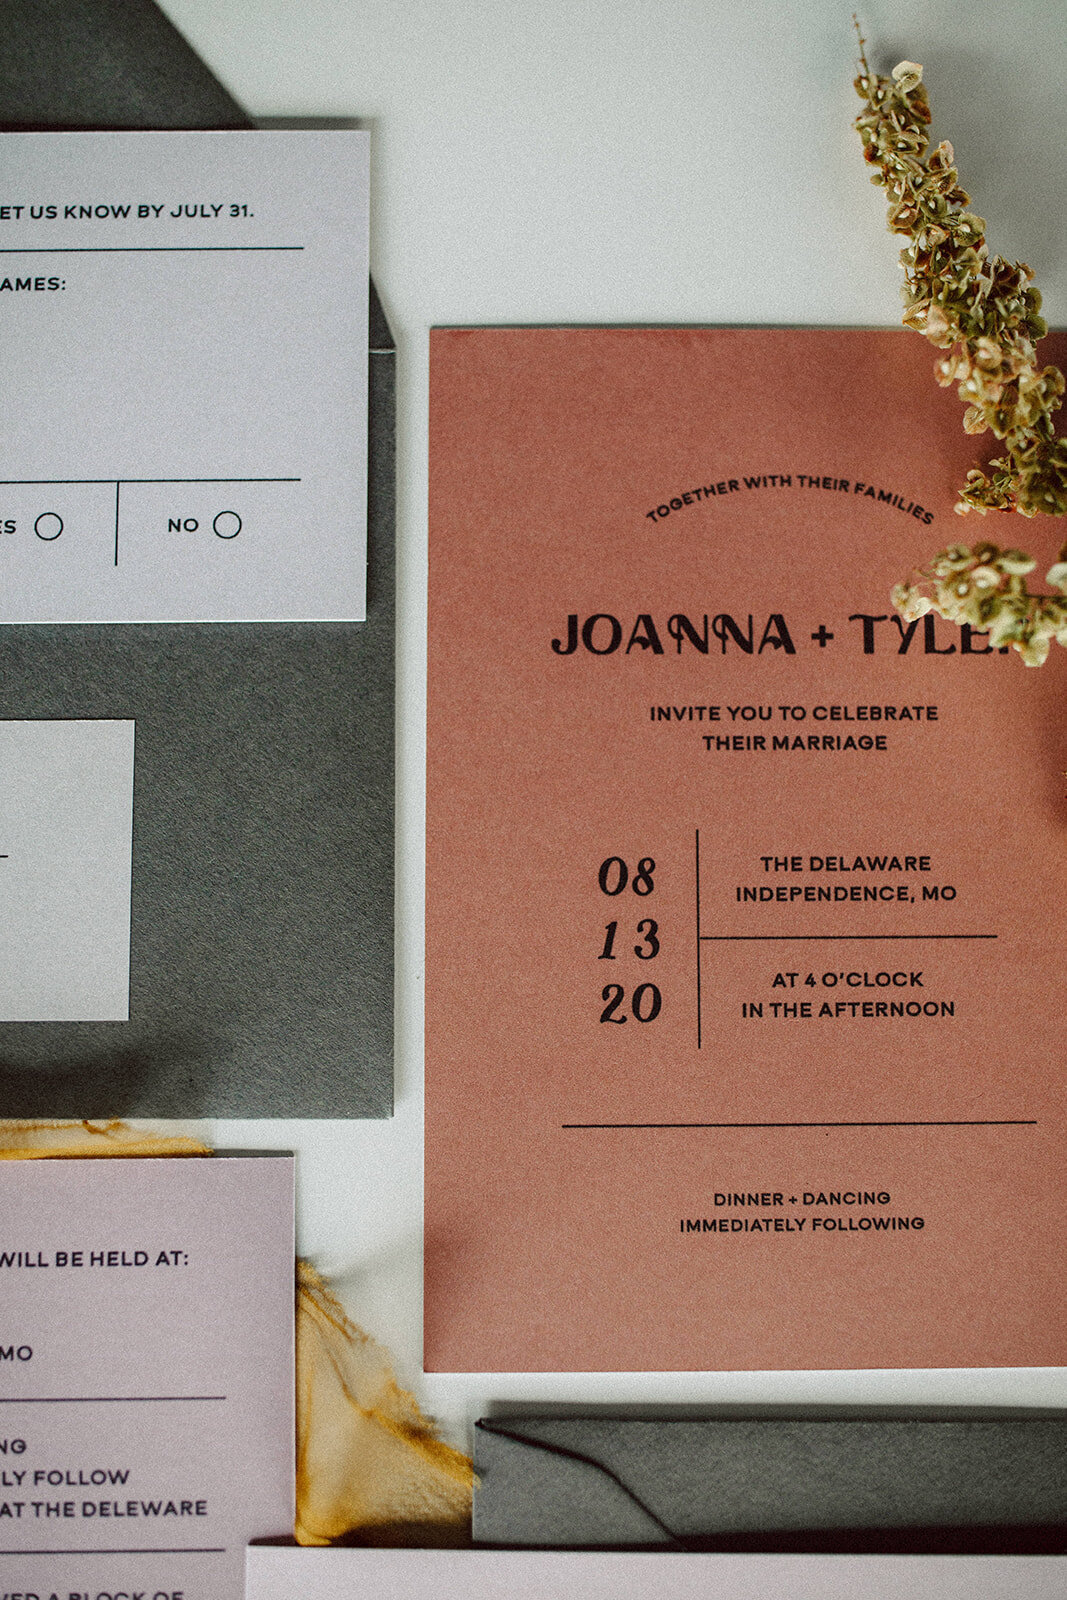 Peach wedding invitation with black font next to light gray and mauve-colored wedding stationery atop white table.